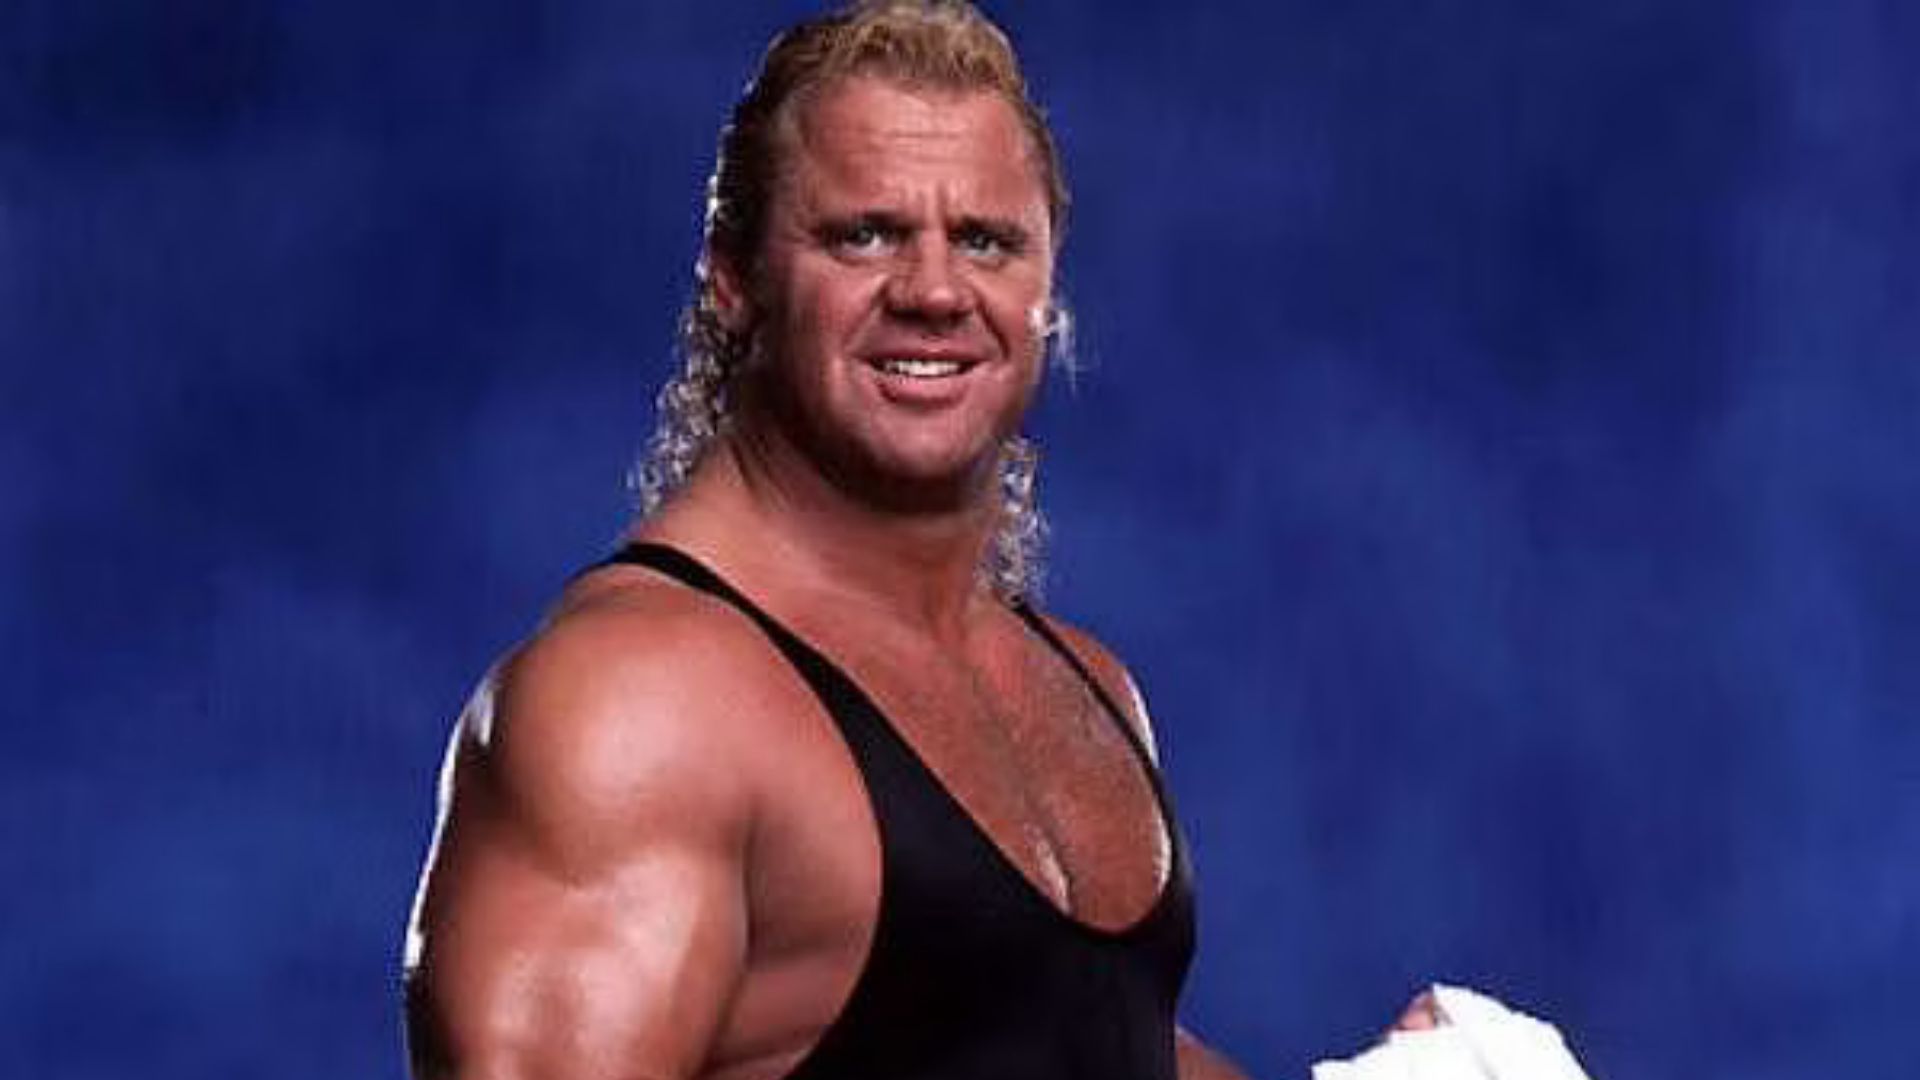 Curt Hennig was a solid competitor in the AWA, WCW, and WWE